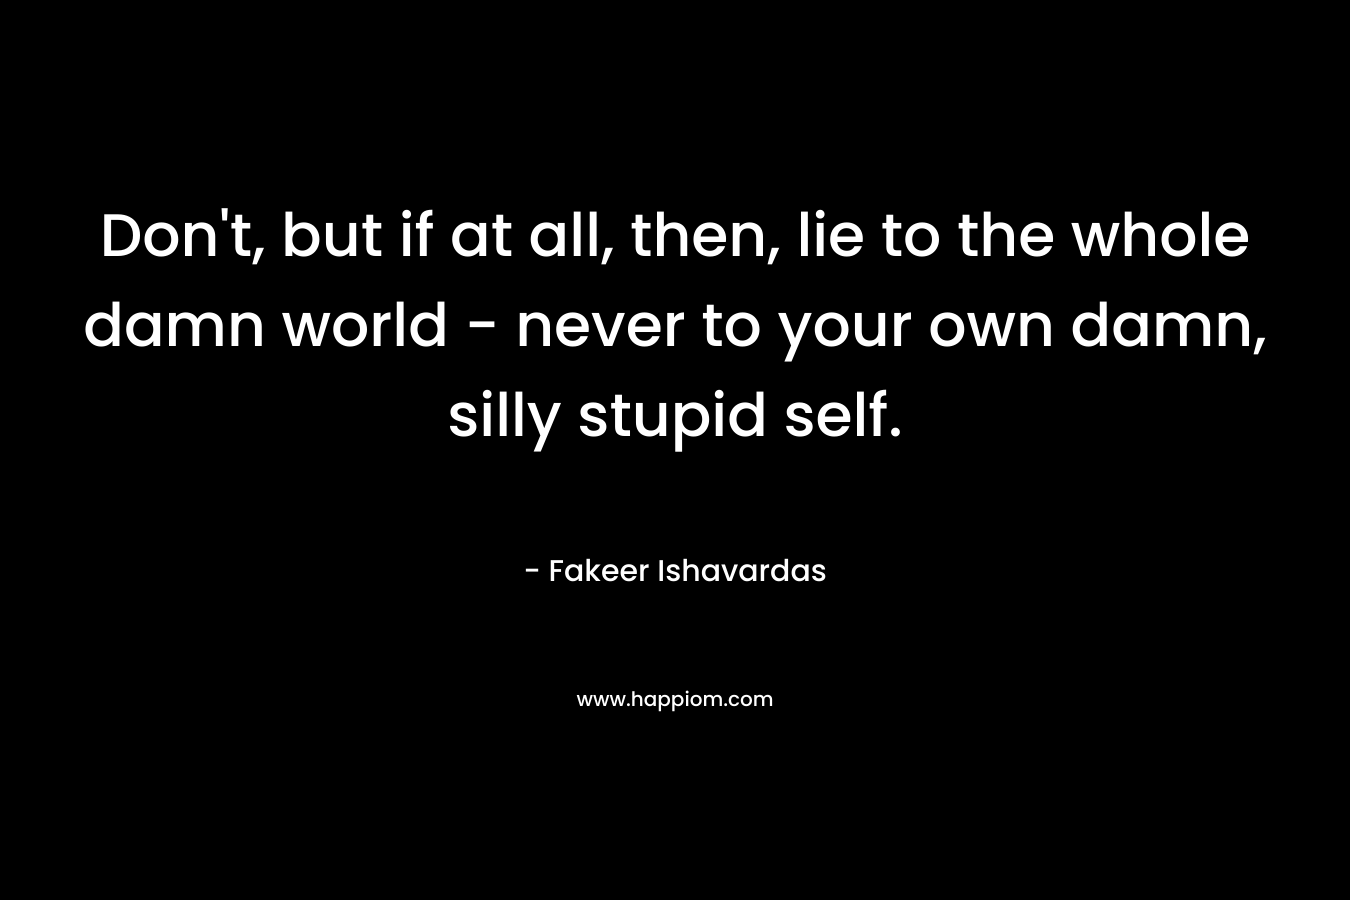 Don't, but if at all, then, lie to the whole damn world - never to your own damn, silly stupid self.